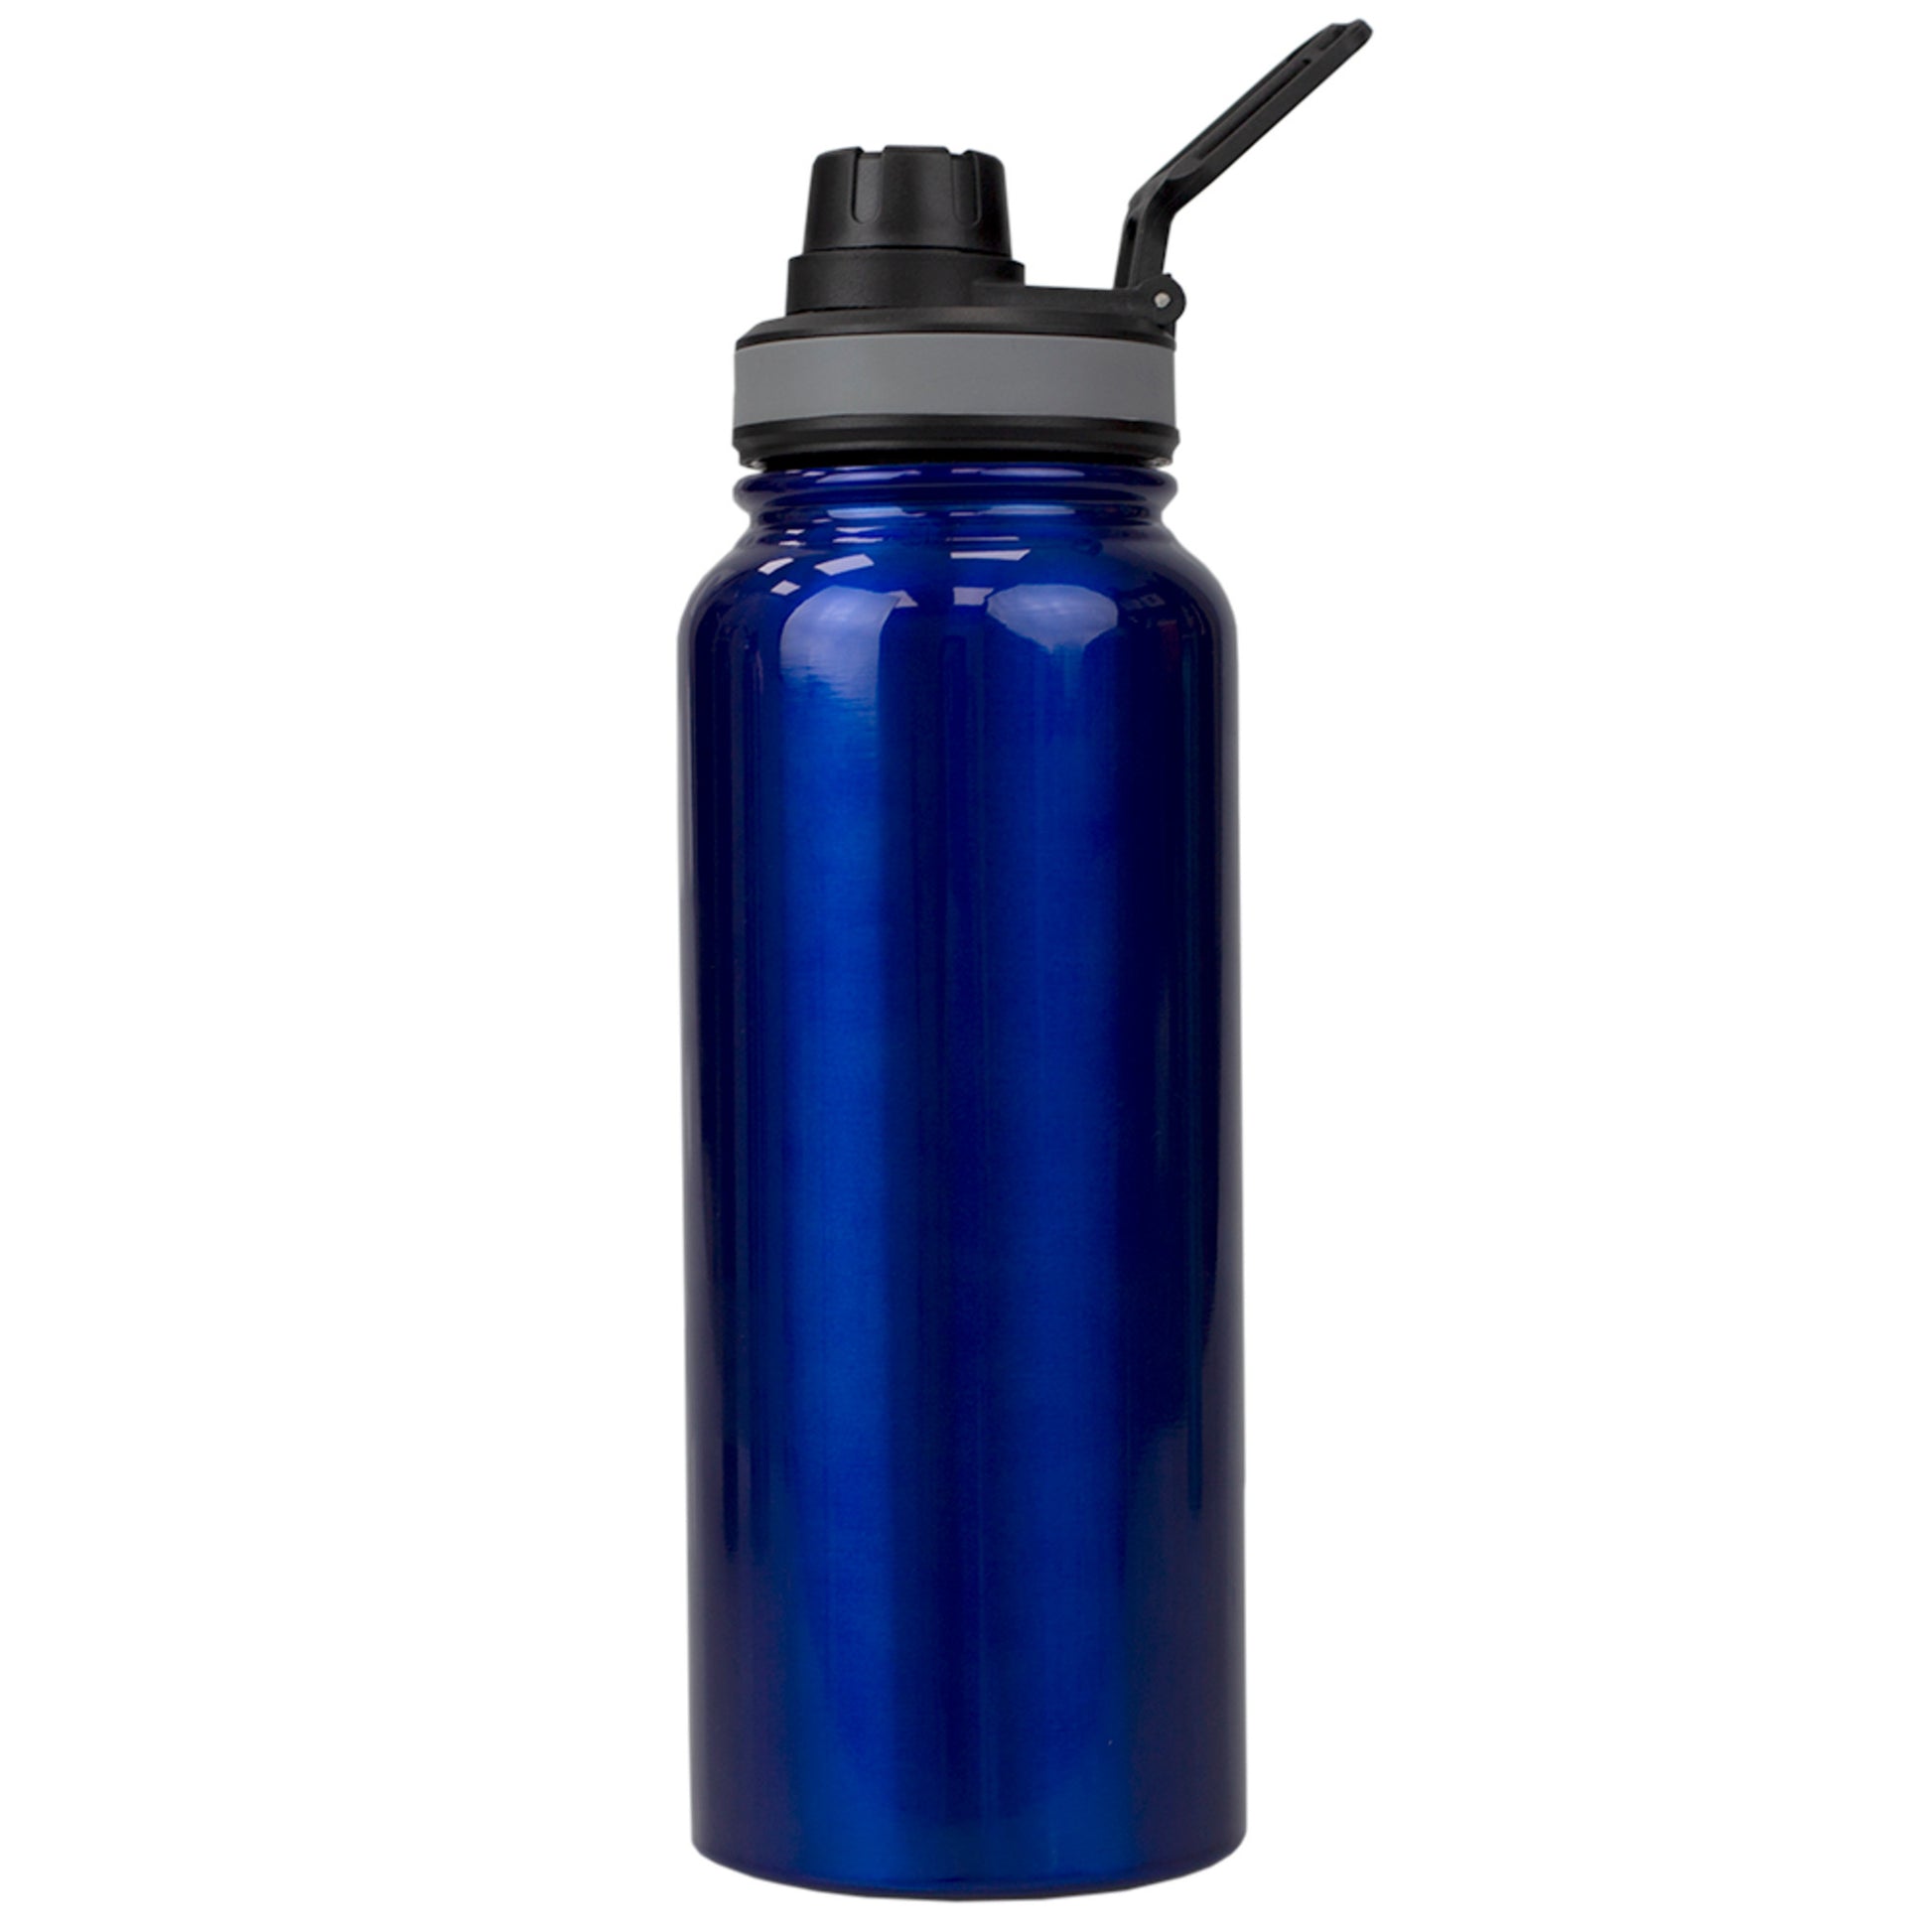 Home Basics Modern Metallic Stainless Steel Travel Water Bottle with Leak-Proof Flip Cap and Built-in Plastic Carrying Loop, Blue - Blue